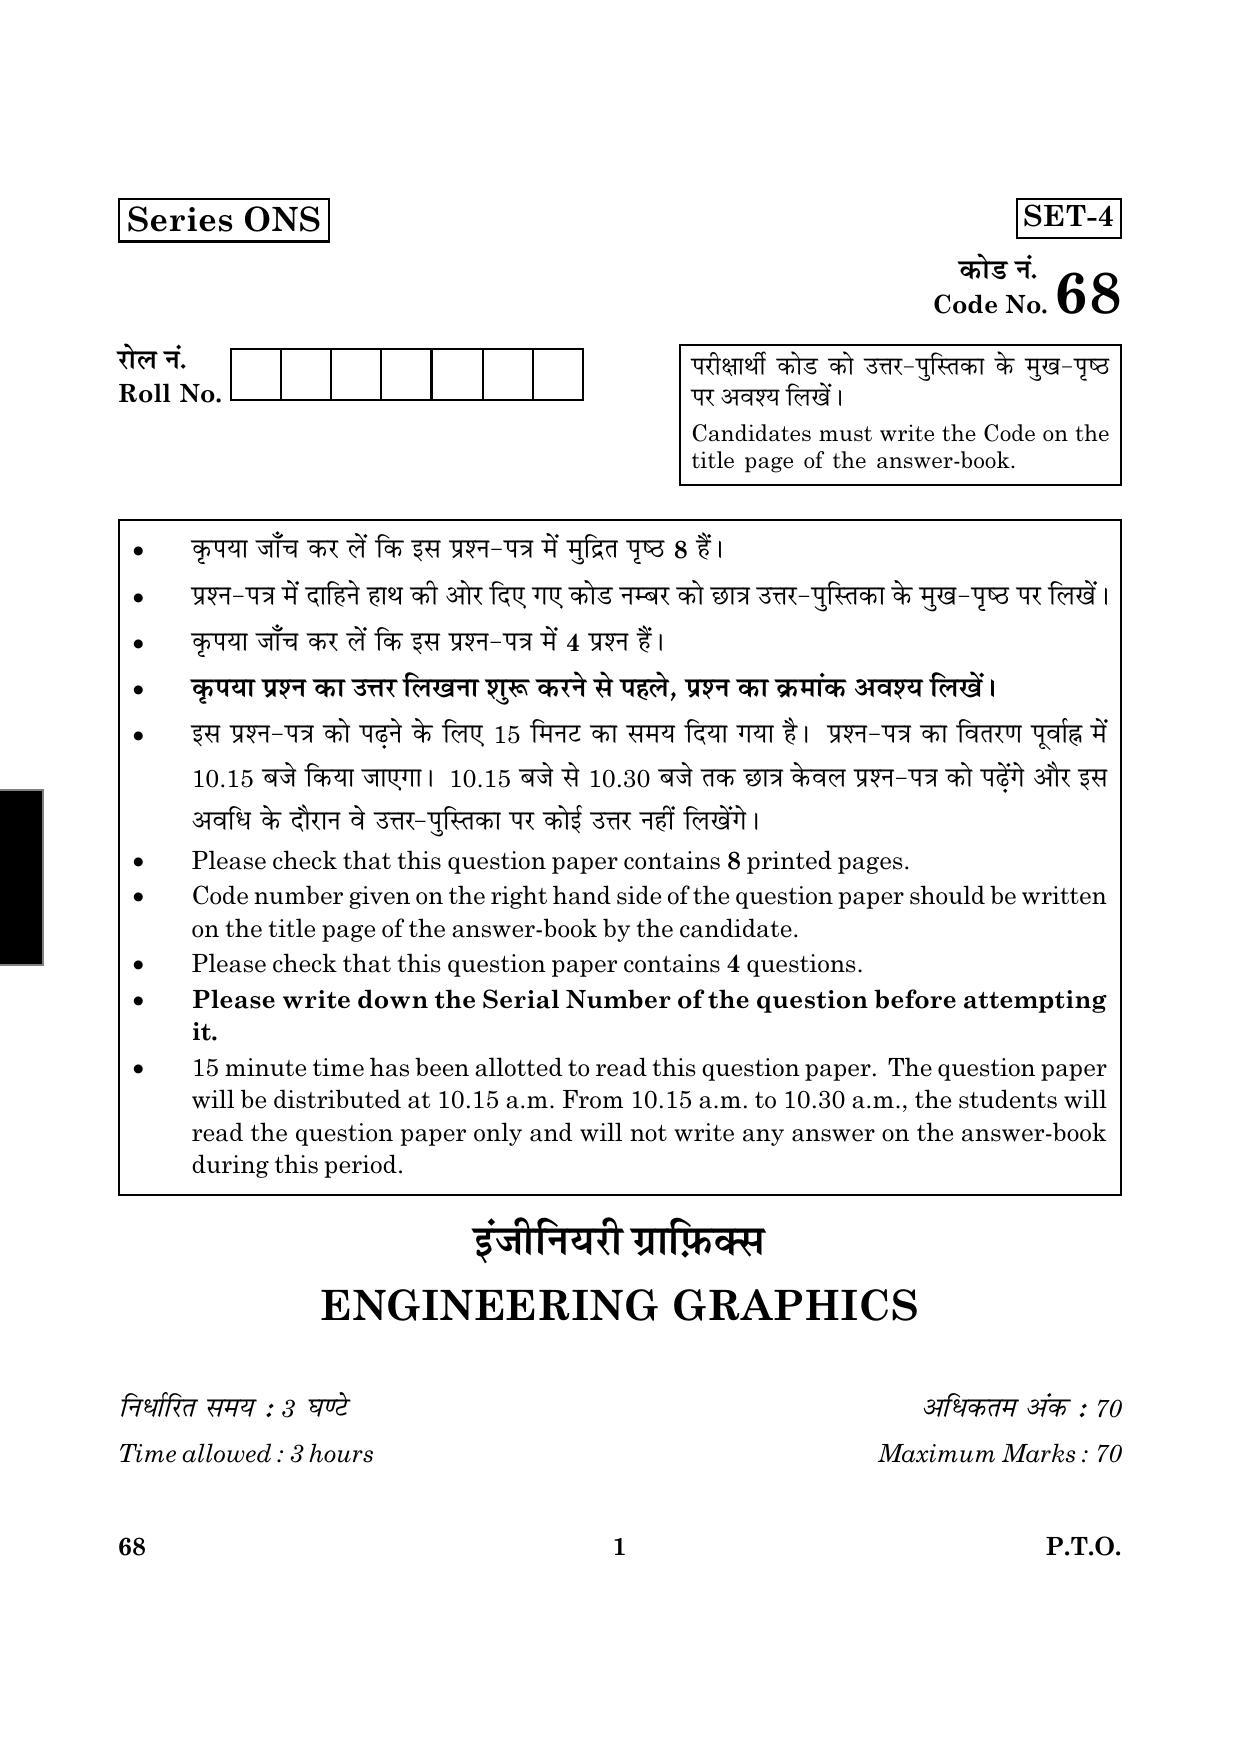 CBSE Class 12 068 Engineering Graphics 2016 Question Paper - Page 1